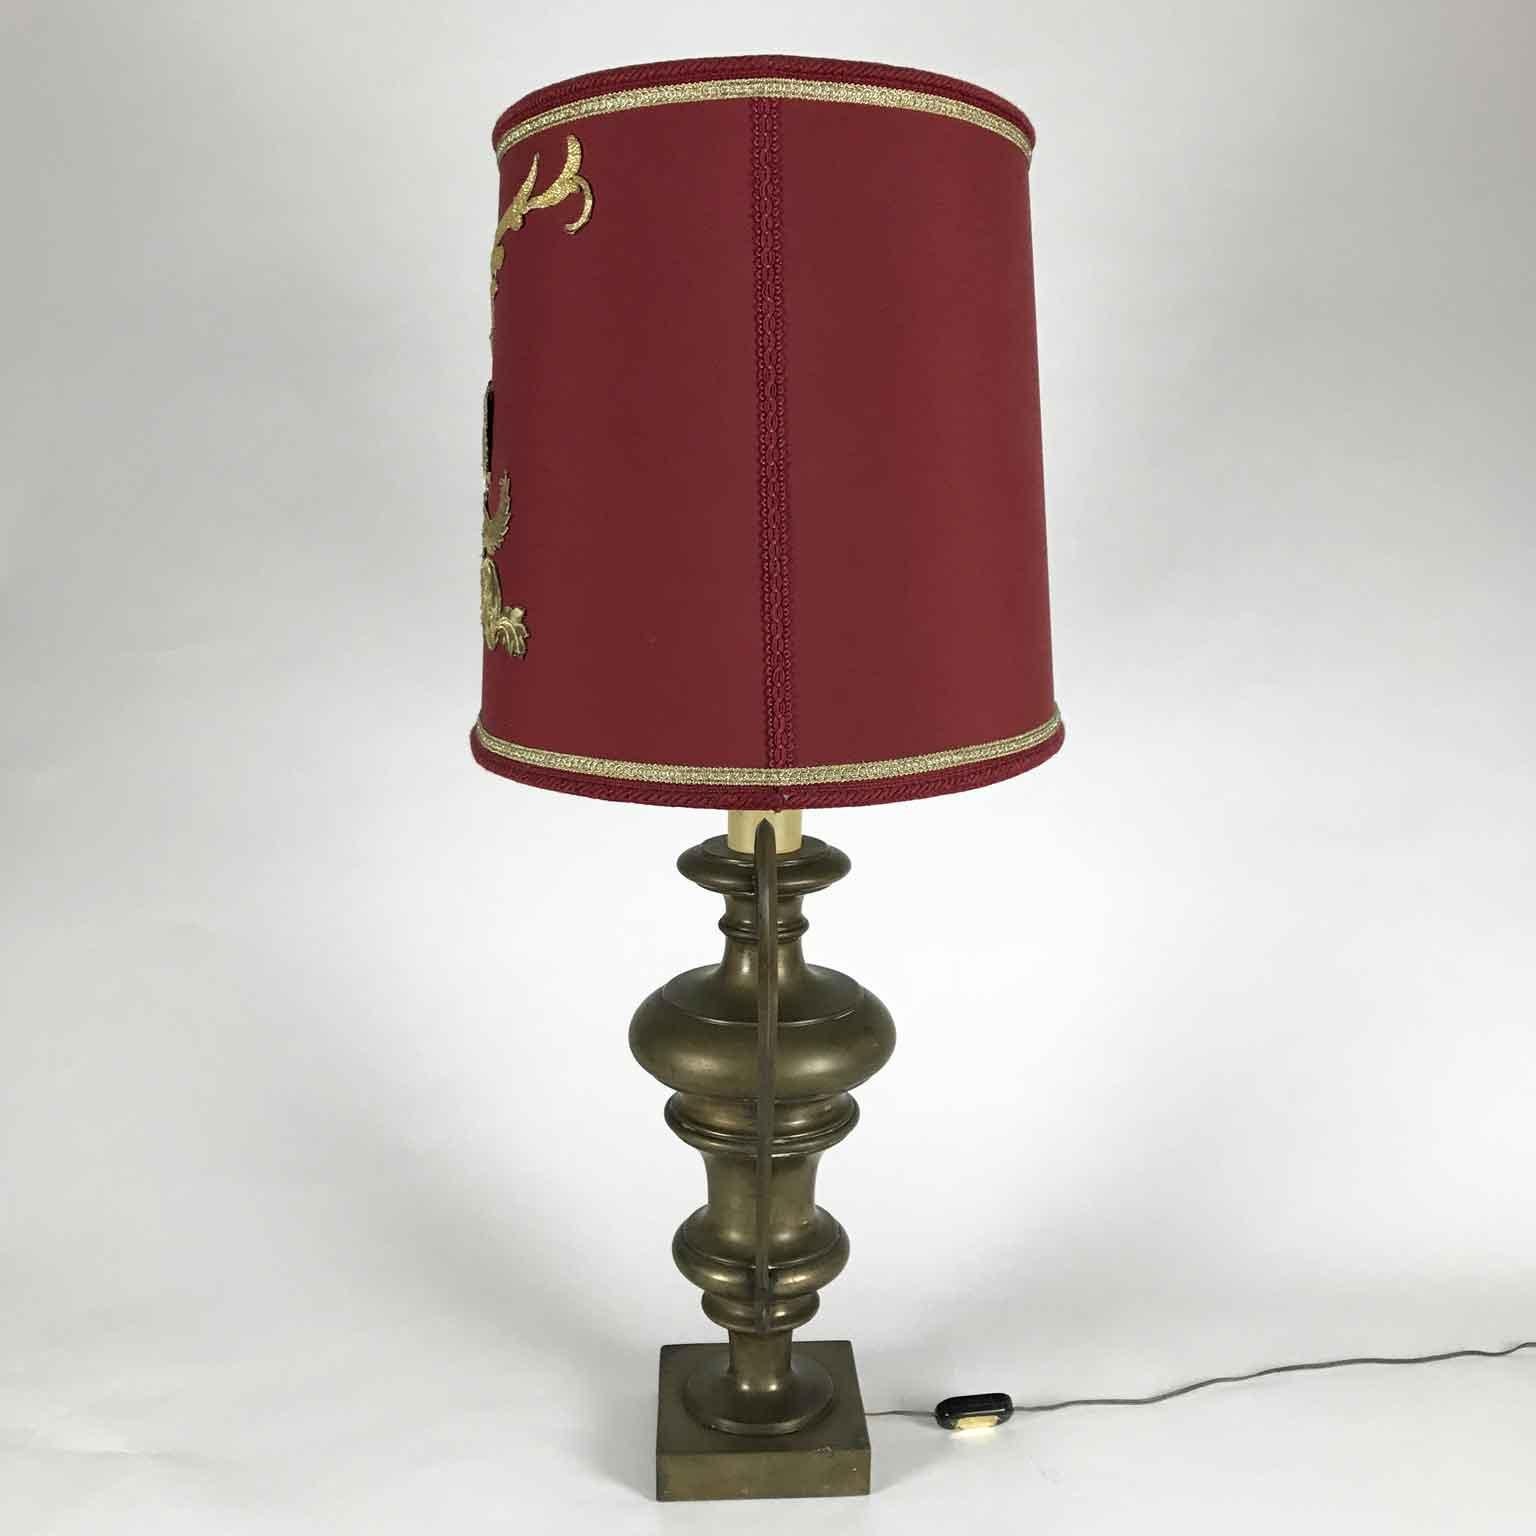 An Empire style large bronze urn vase wired as table lamp with an oval red lampshade. An Italian circular handled decorative bronze center vase, the so-called Italian portapalme, set on square base, realized in cast bronze, this exquisite mid-20th